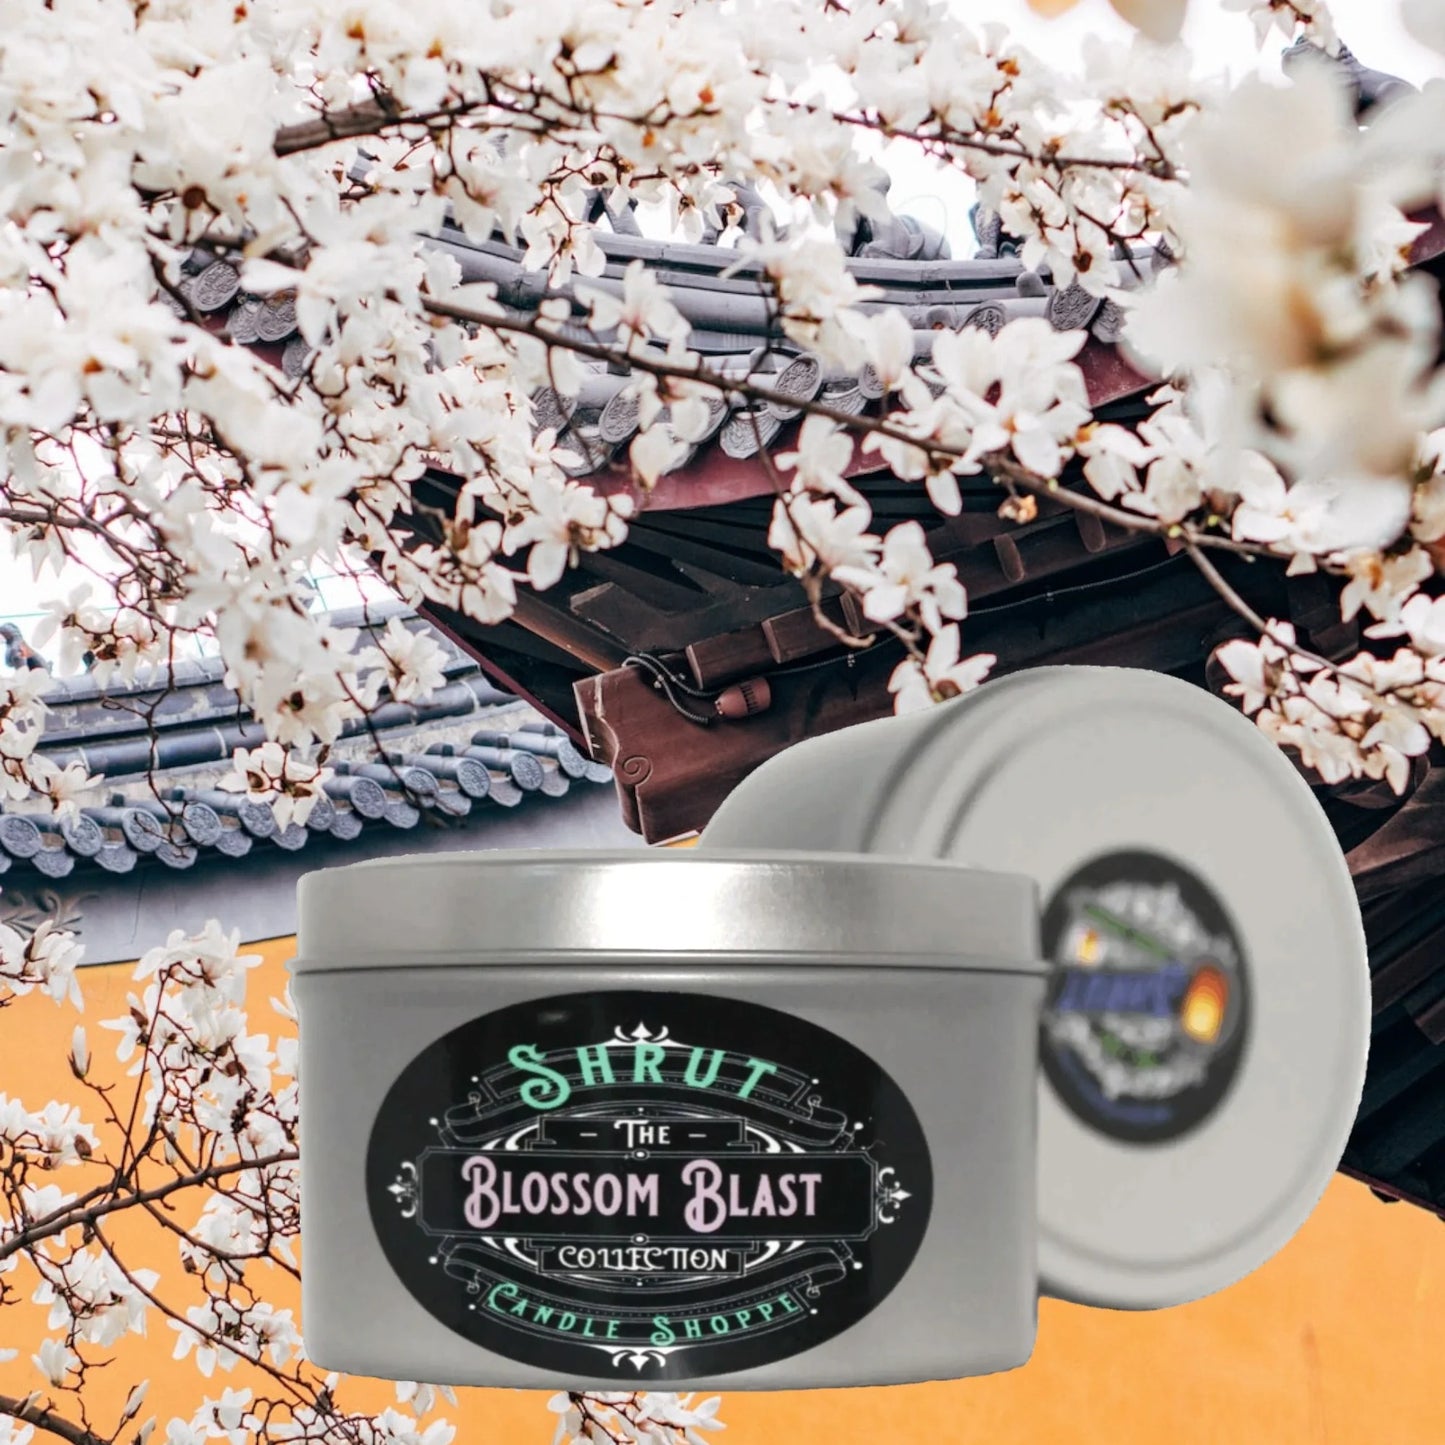 Blossom Blast Scented Candle - Your Tropical Escape